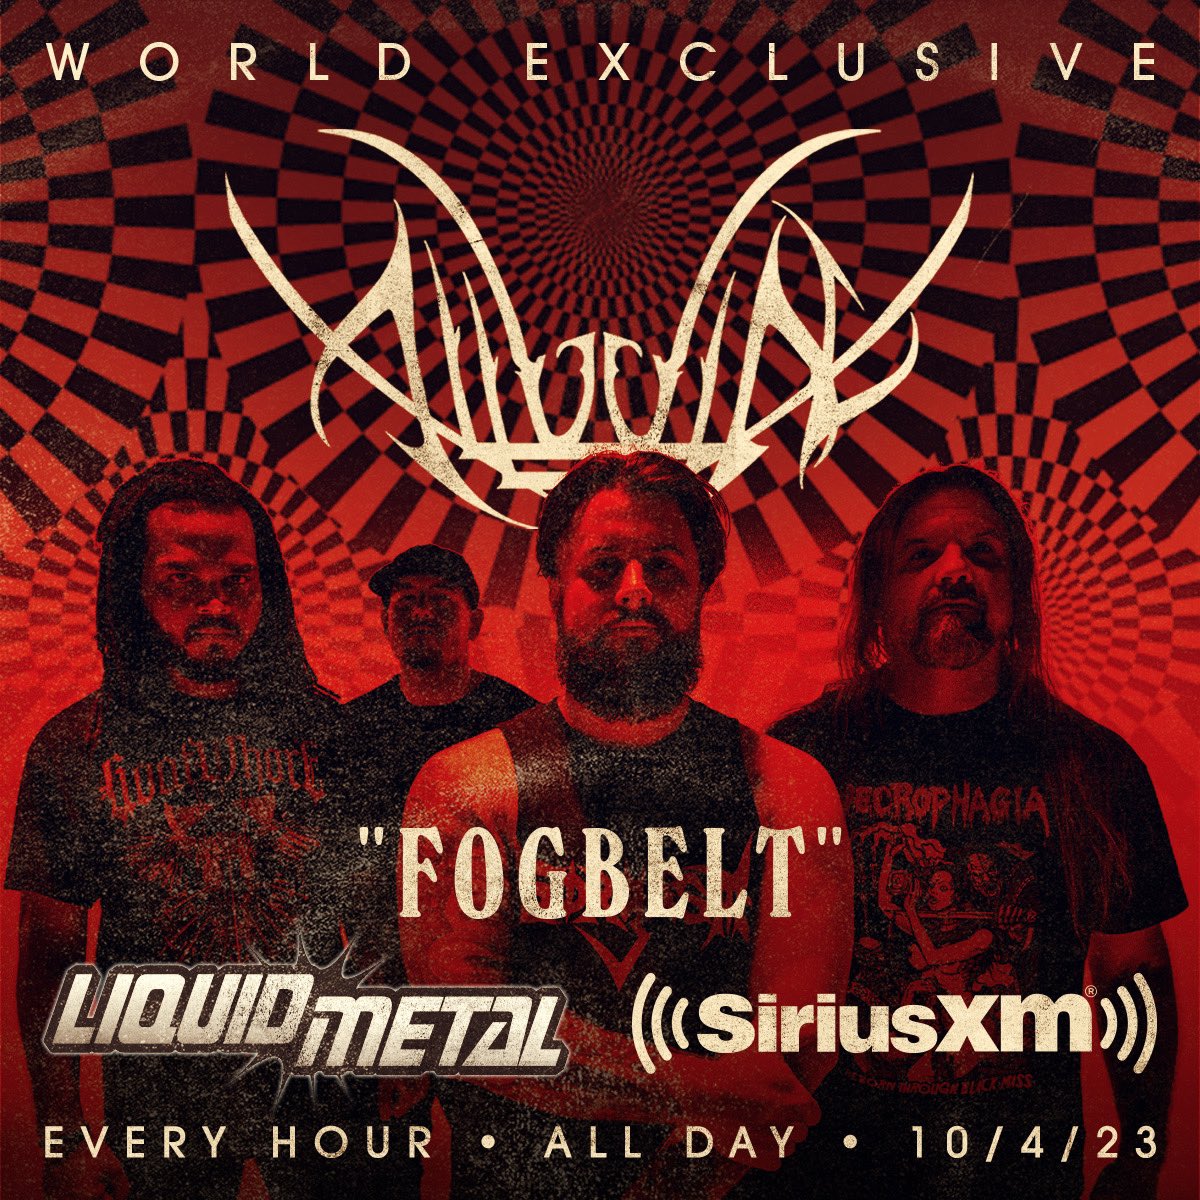 Today on Liquid Metal our New Single “Fogbelt” will be streaming there exclusively All Day!
Listen EVERY HOUR on @SIRIUSXM Channel 40 - @SXMLiquidMetal